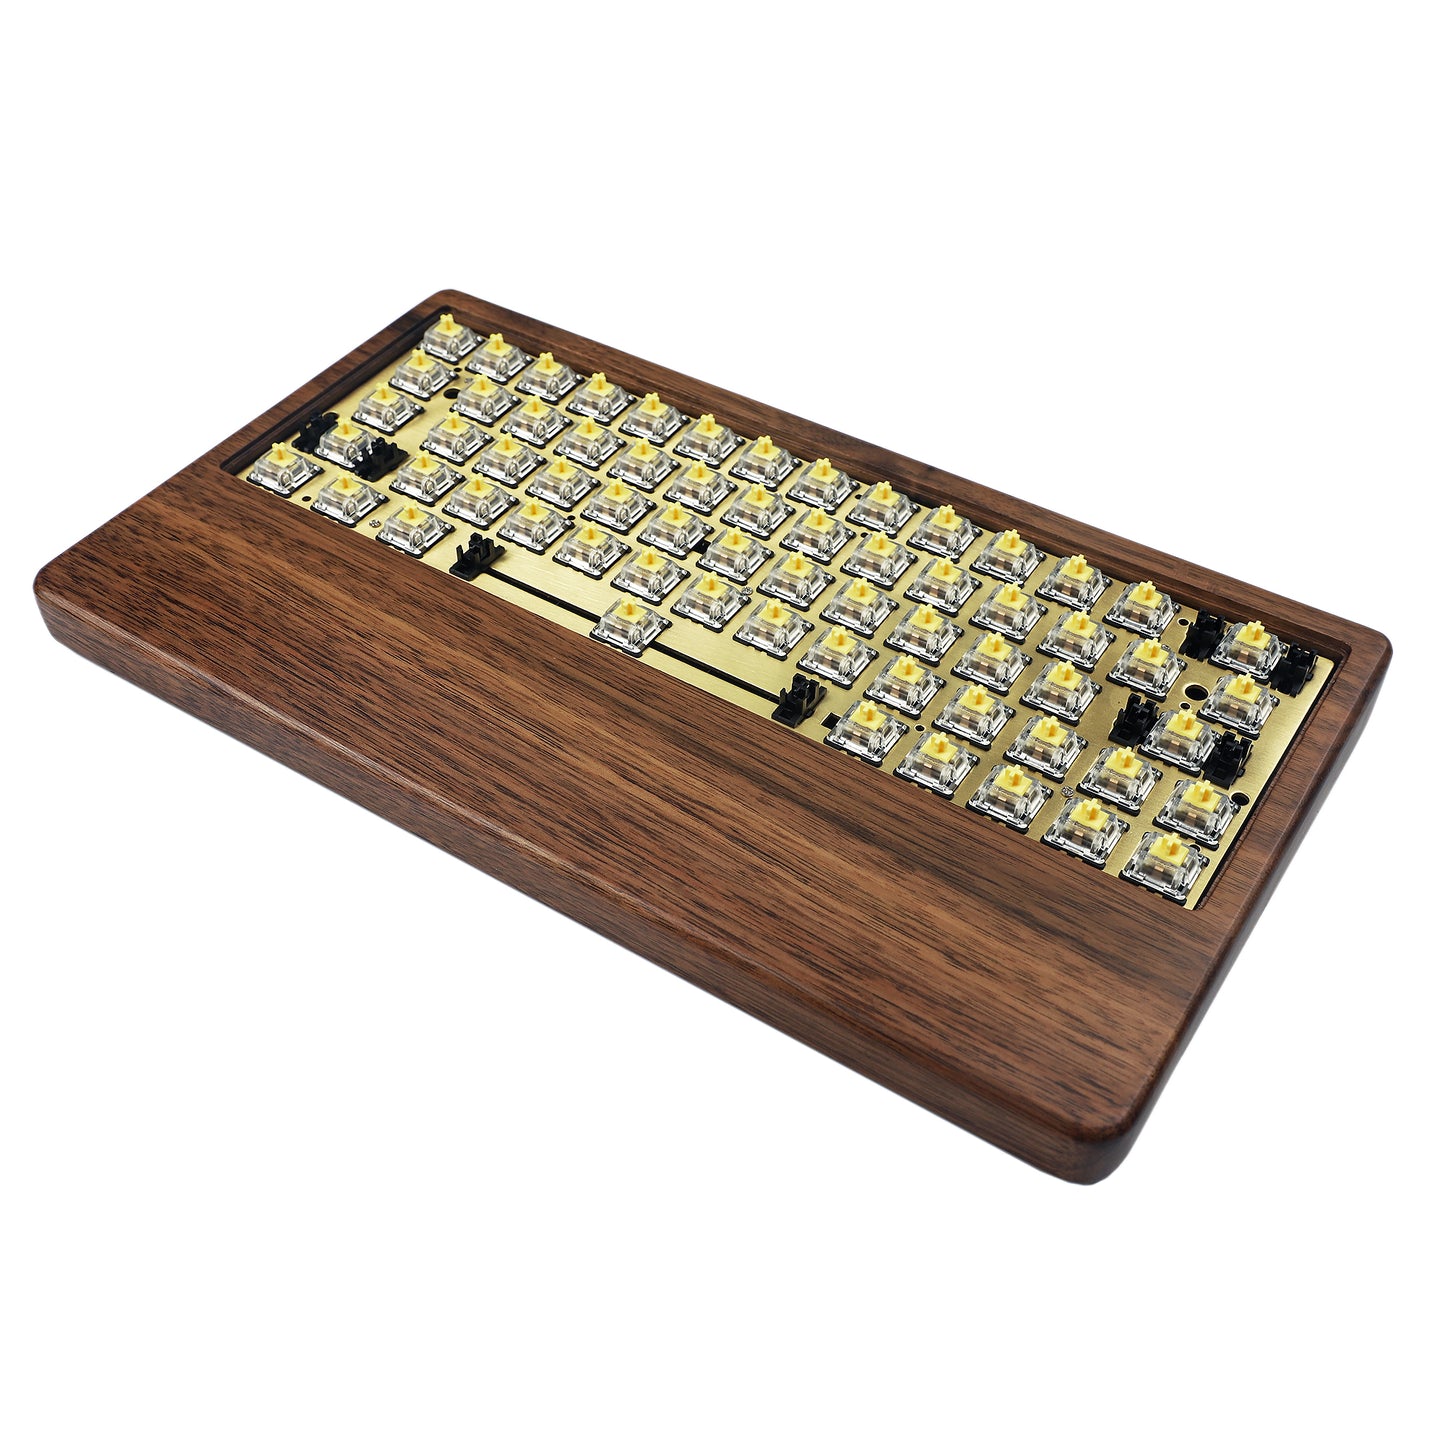 GK61 GK64 Wood Case And Wrist 2 In 1 Kit(RGB Hotswap PCB/Bluetooth Or Wired Programmable)